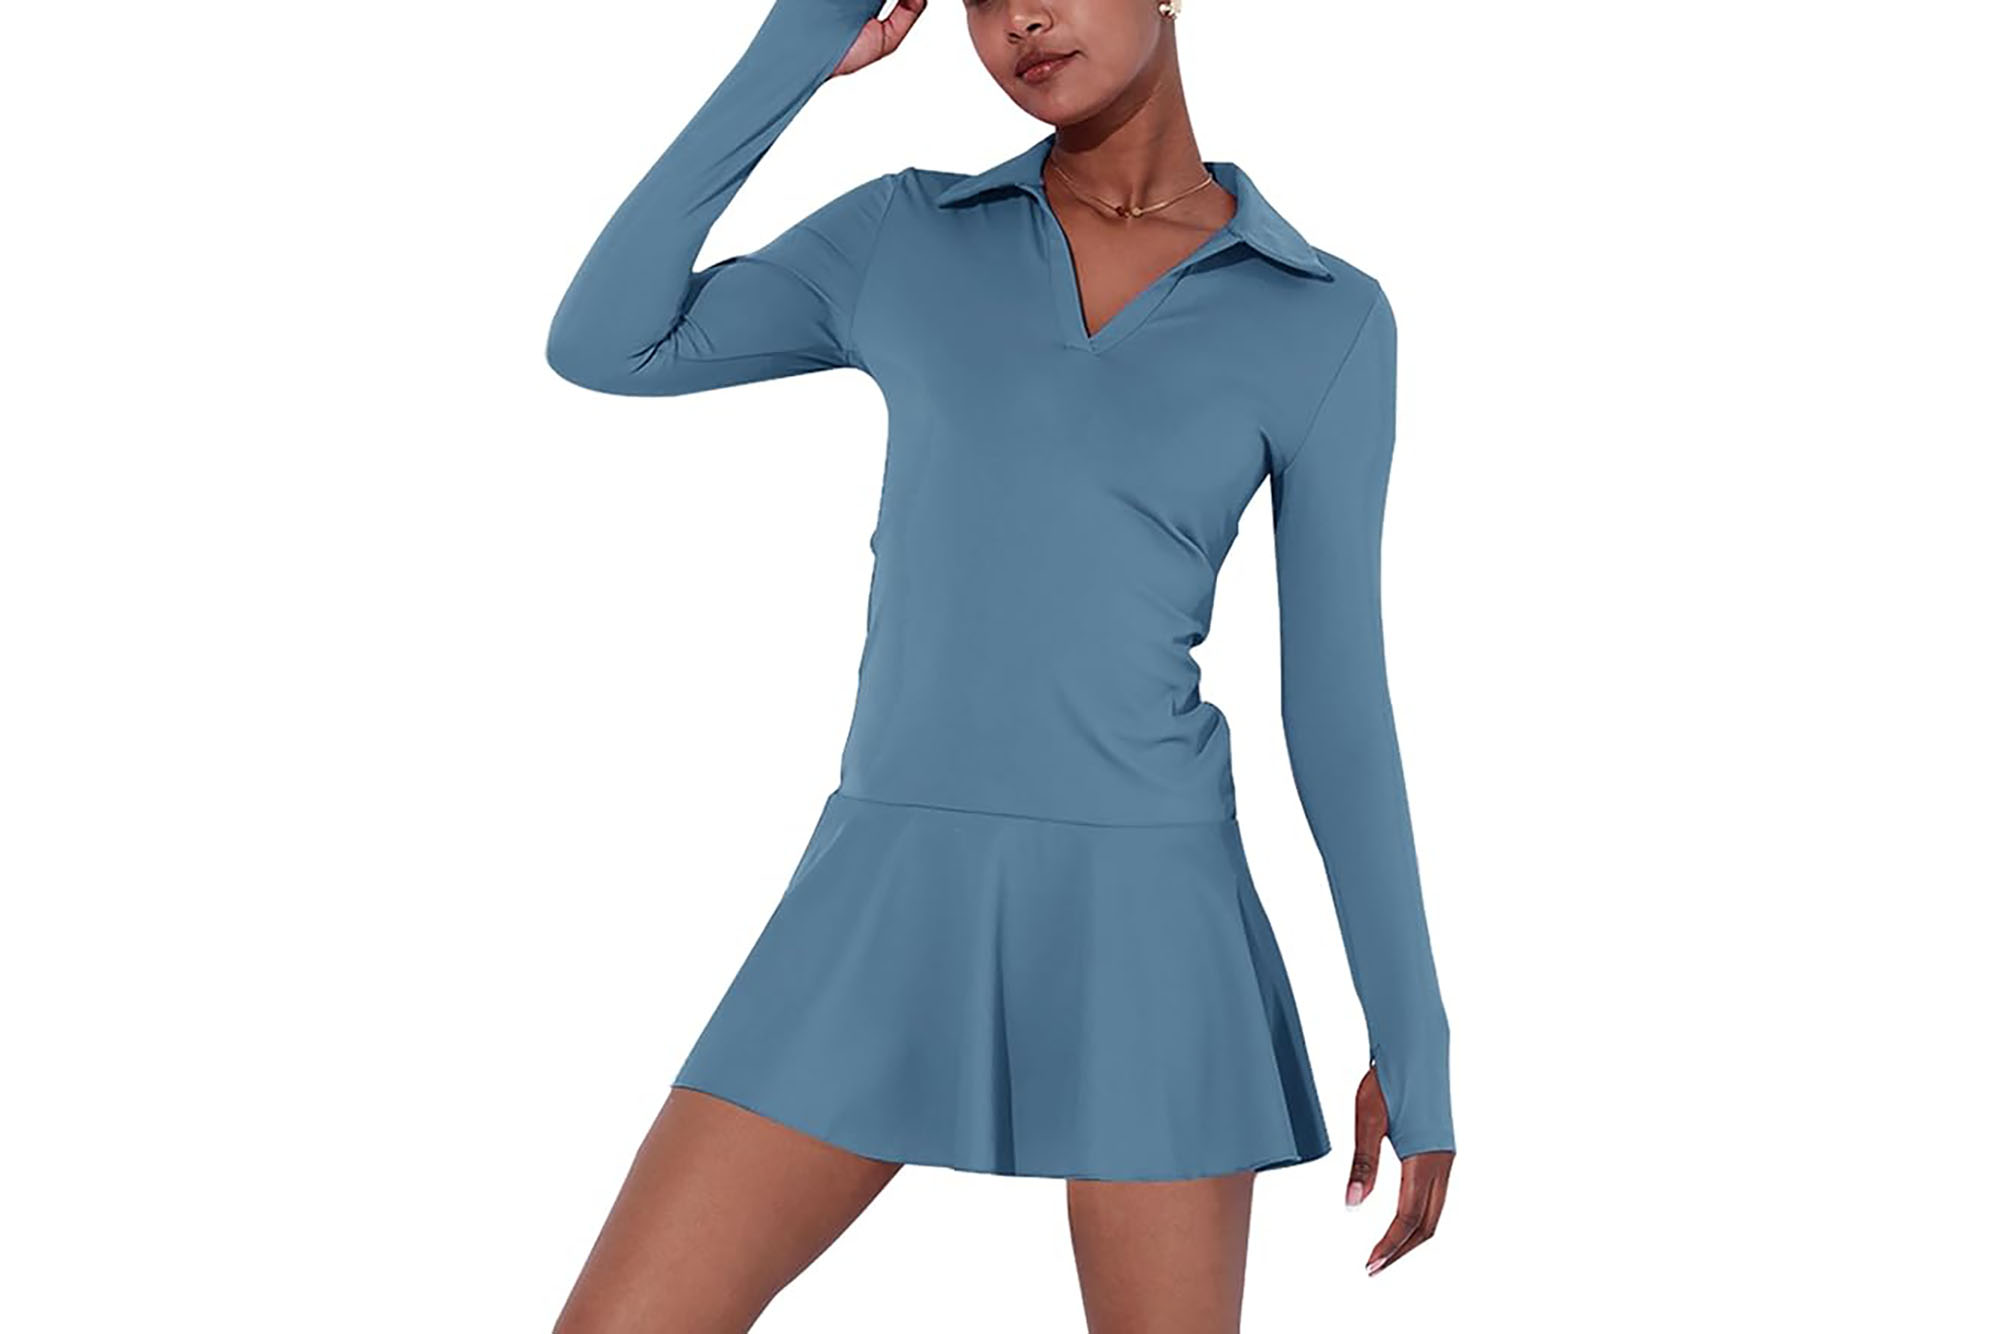 Tennis Dress for Women, Workout Dress with Built-in India | Ubuy